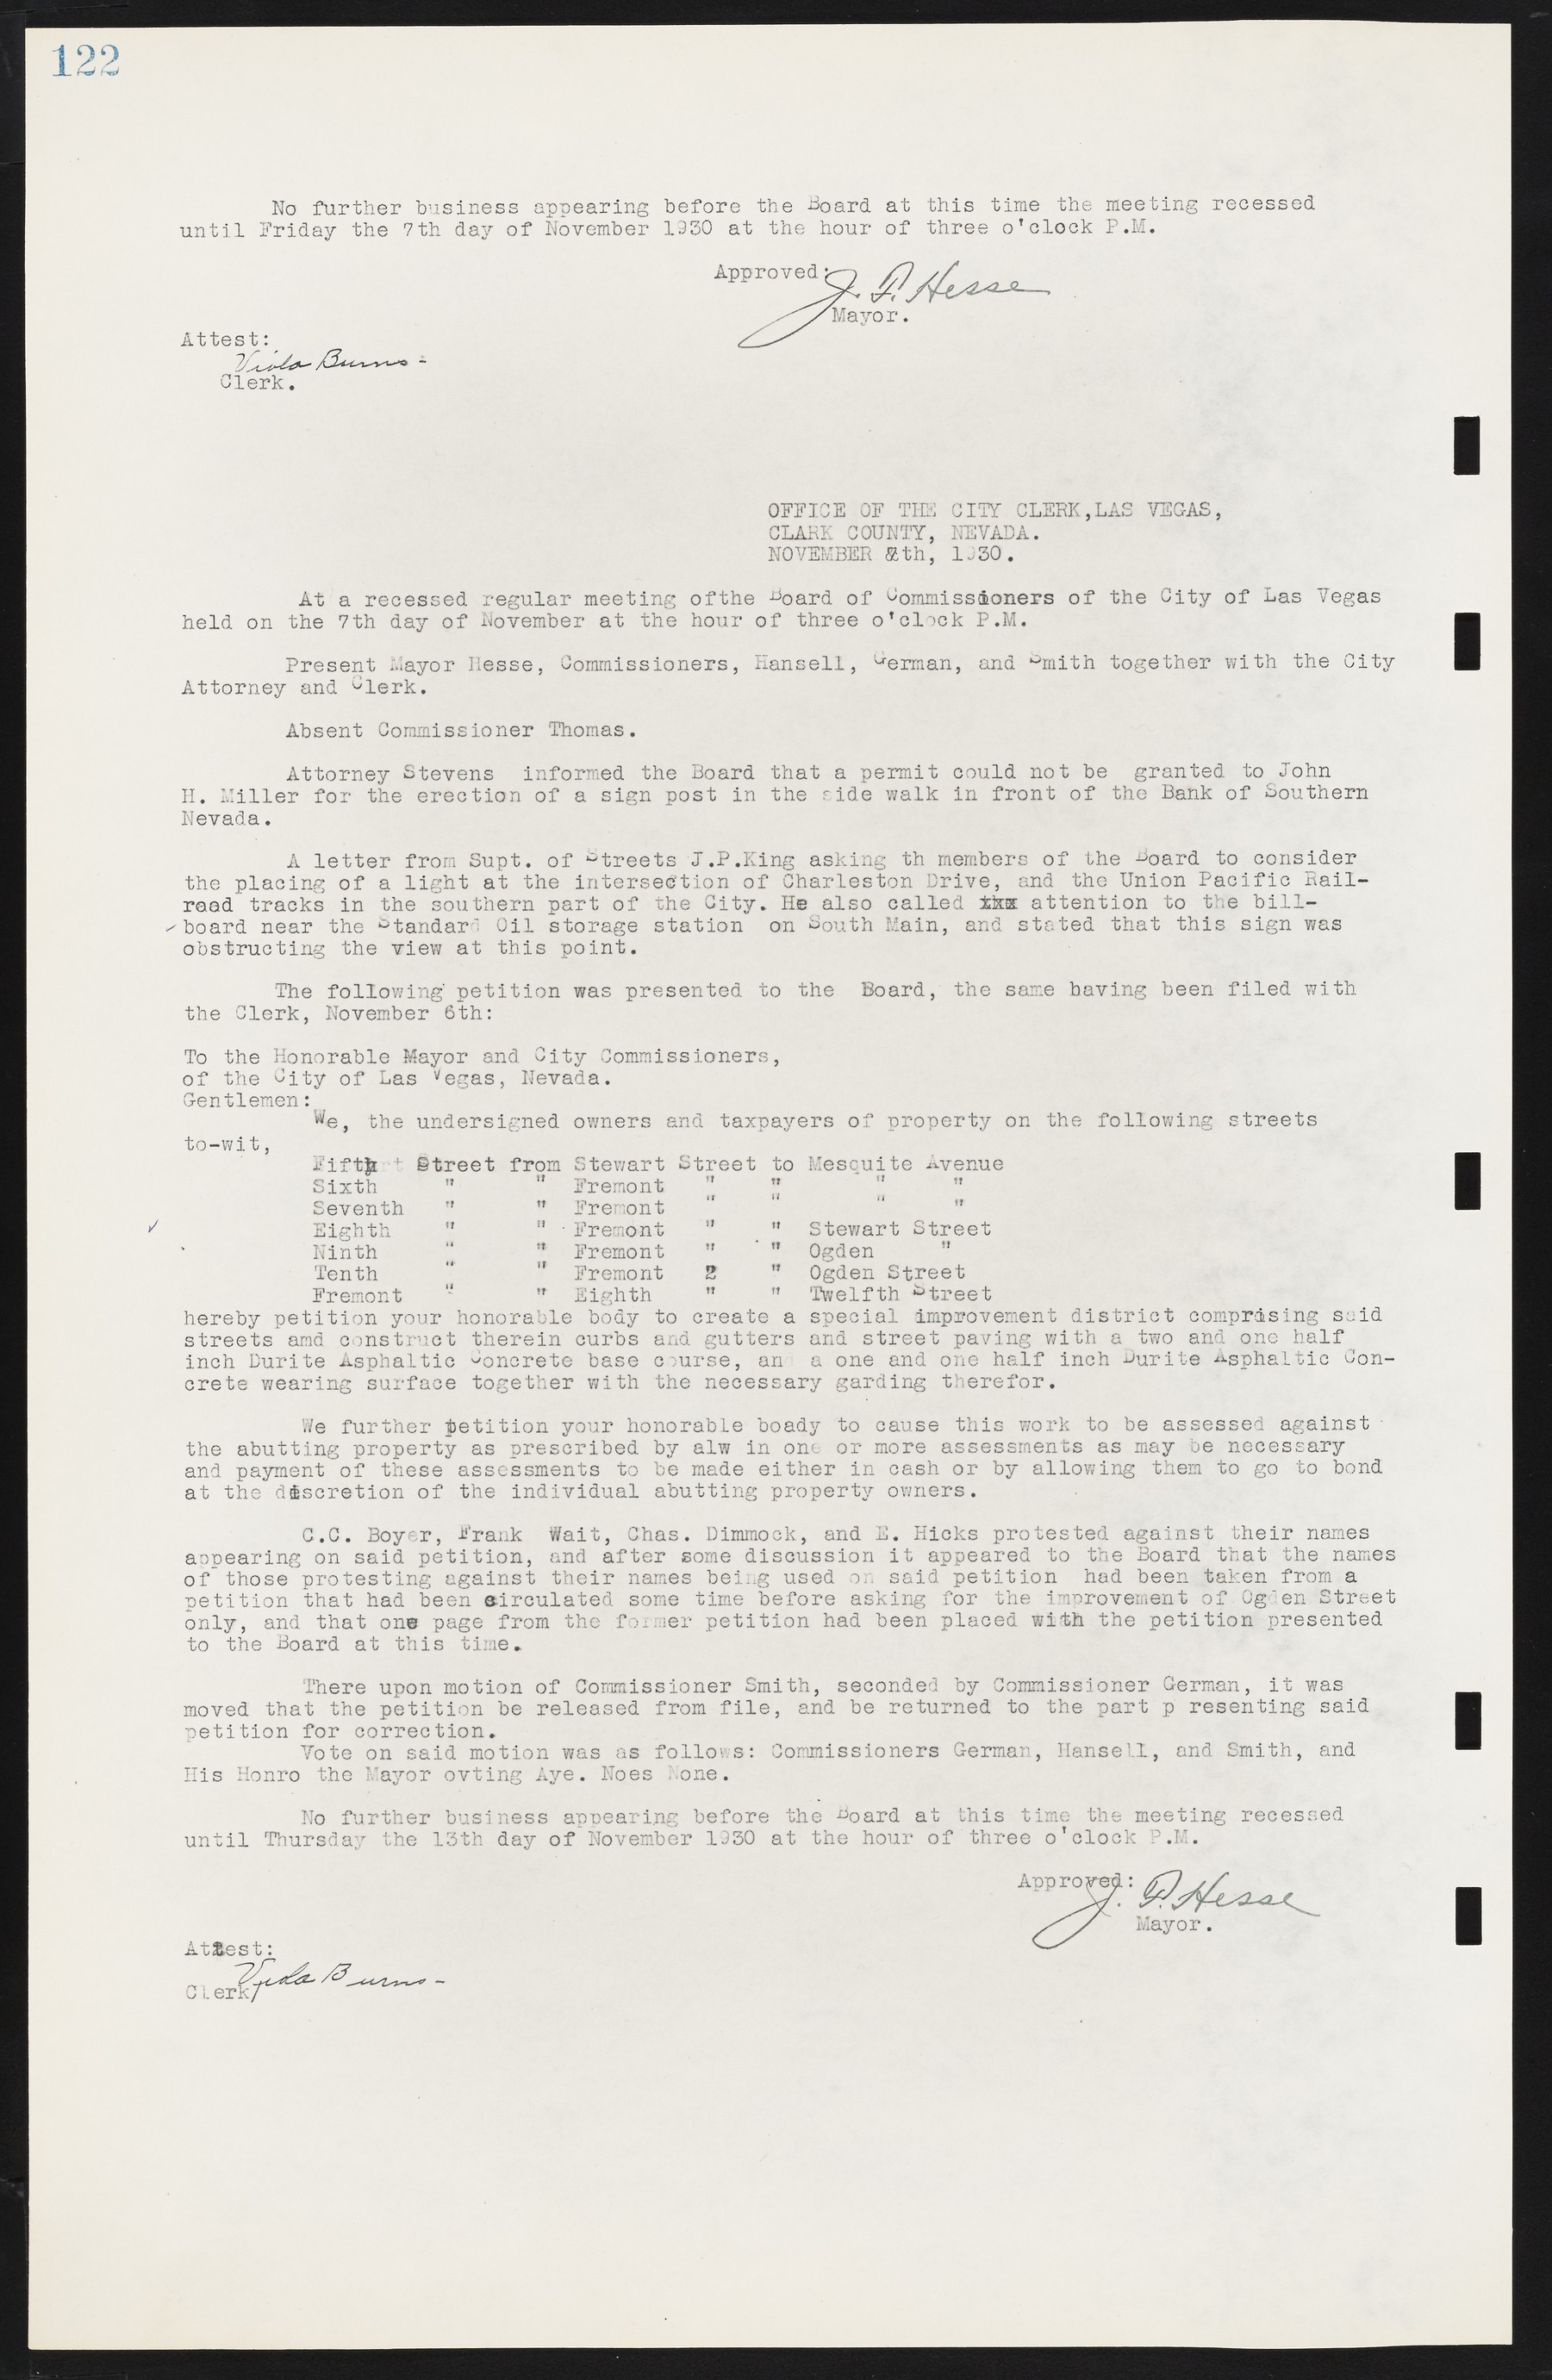 Las Vegas City Commission Minutes, May 14, 1929 to February 11, 1937, lvc000003-128